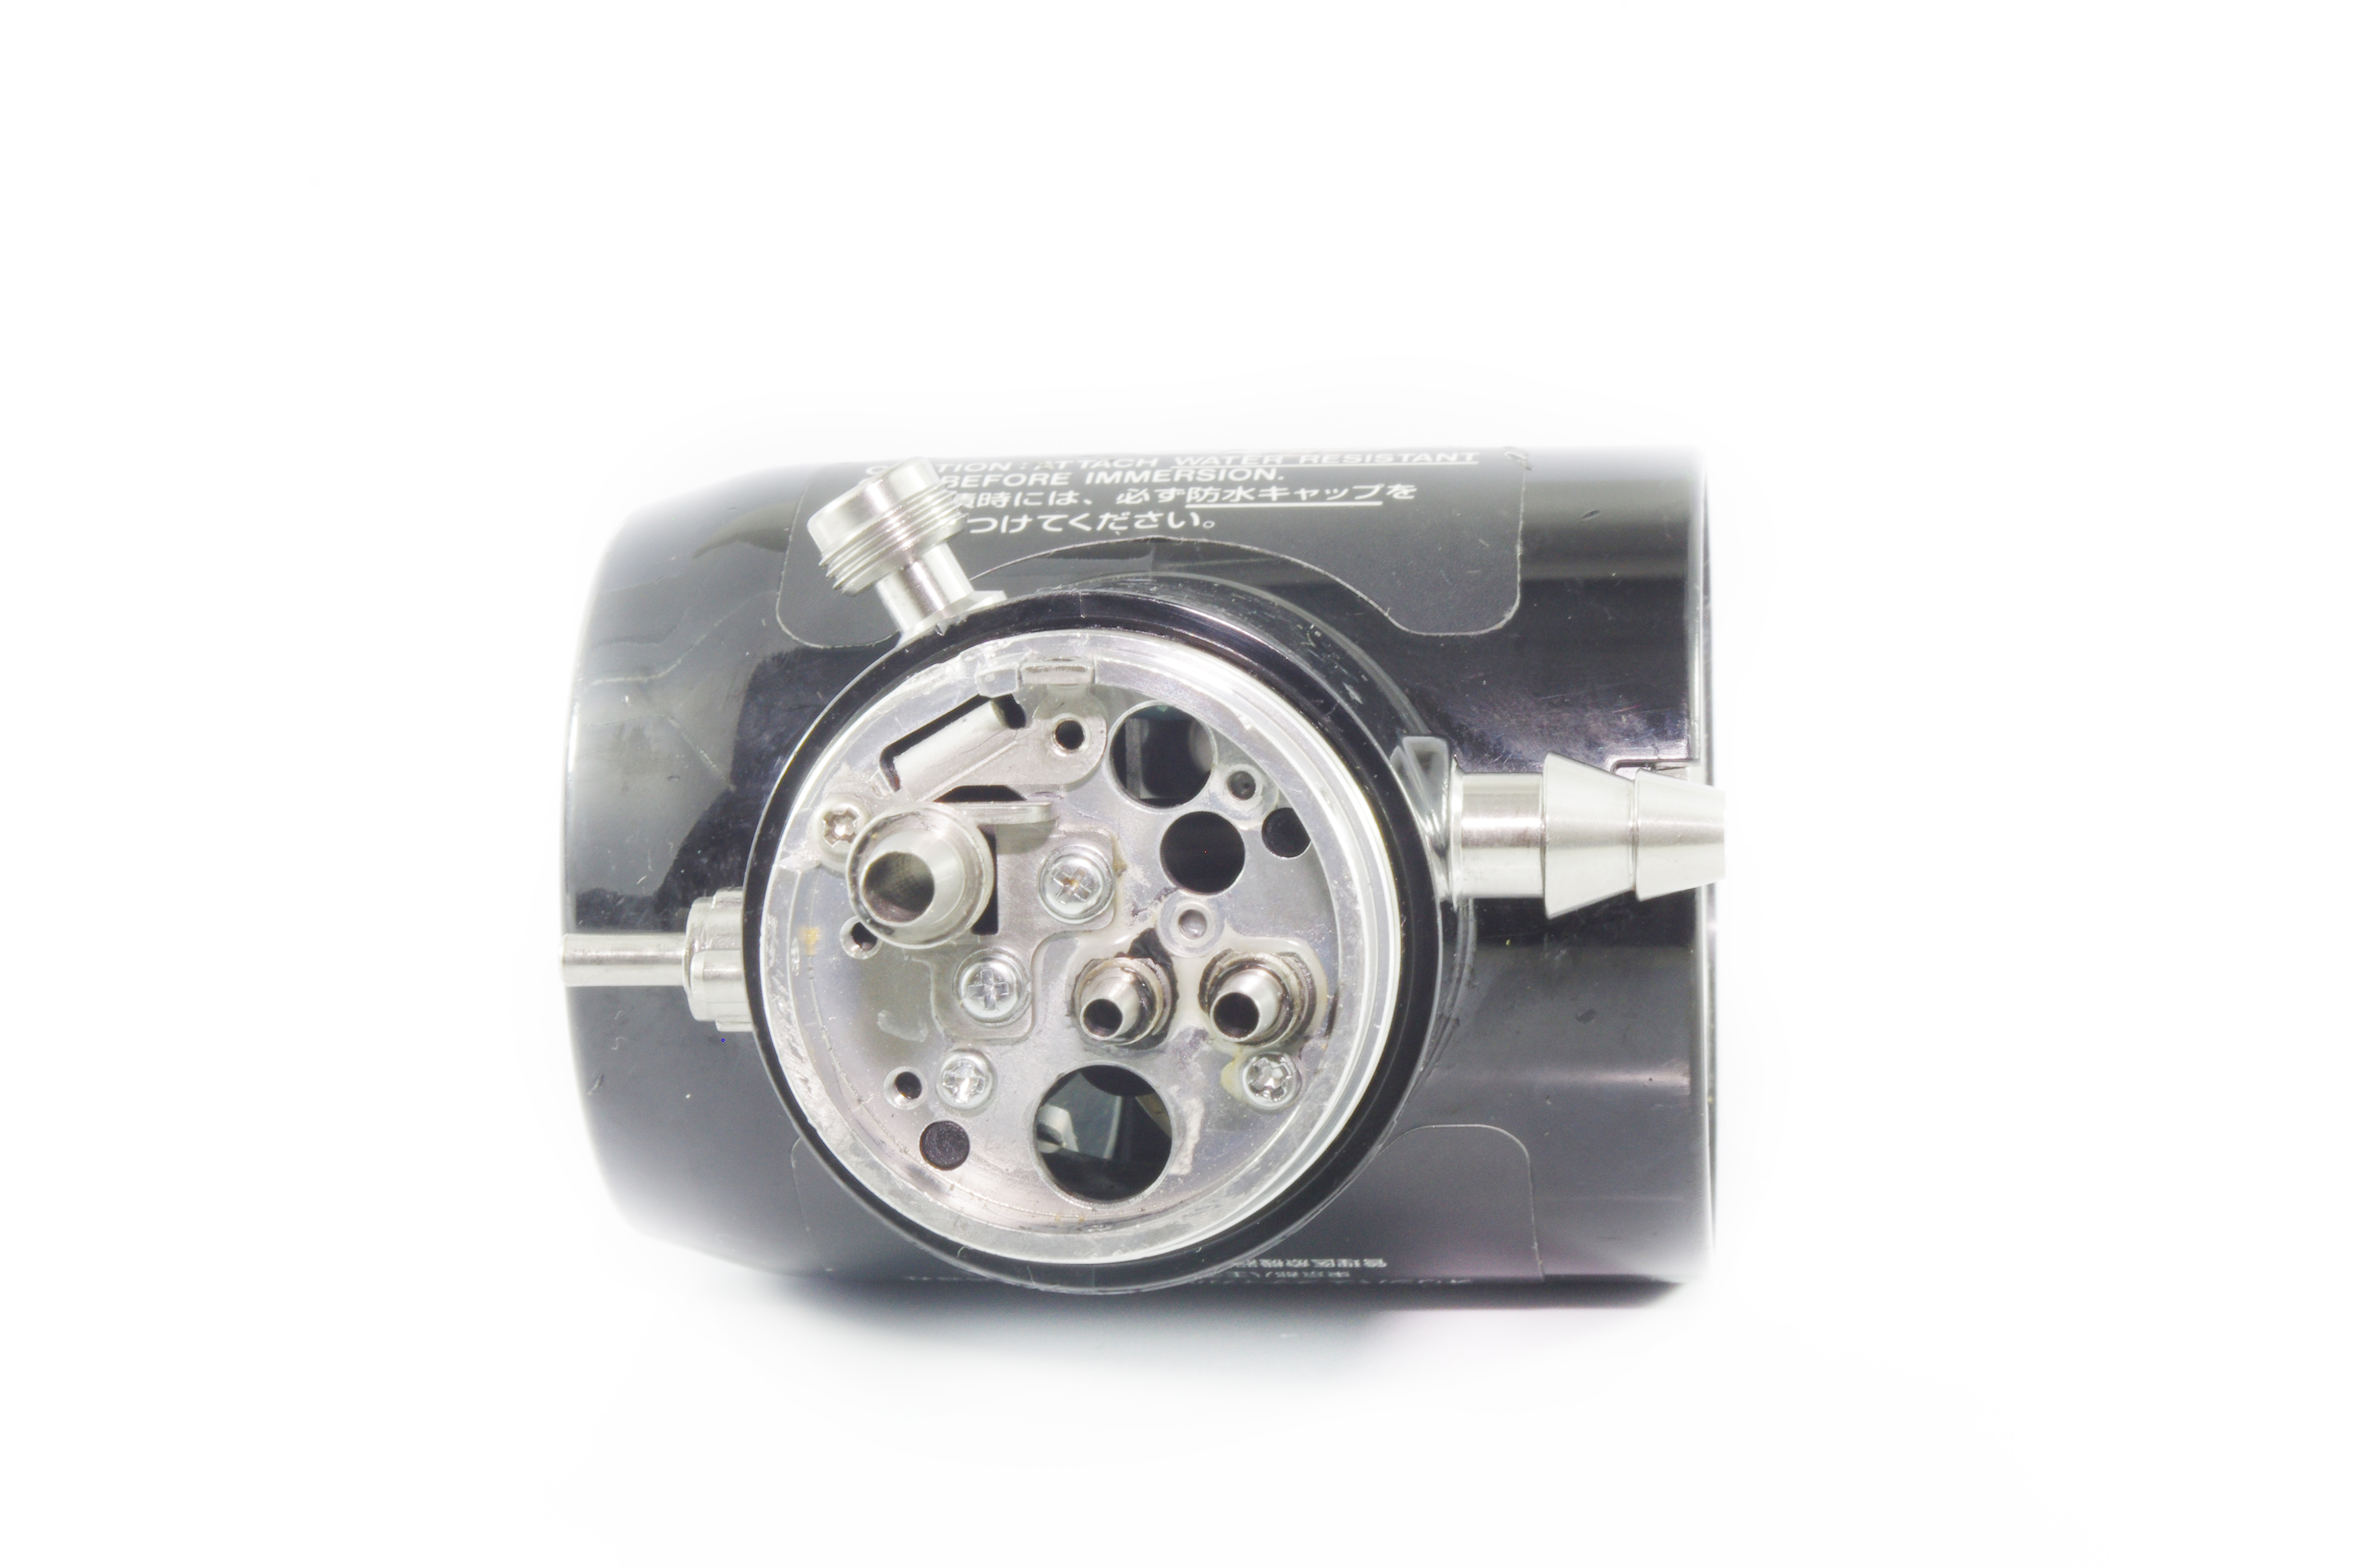 OEM Electrical Connector Housing - GIF-H180